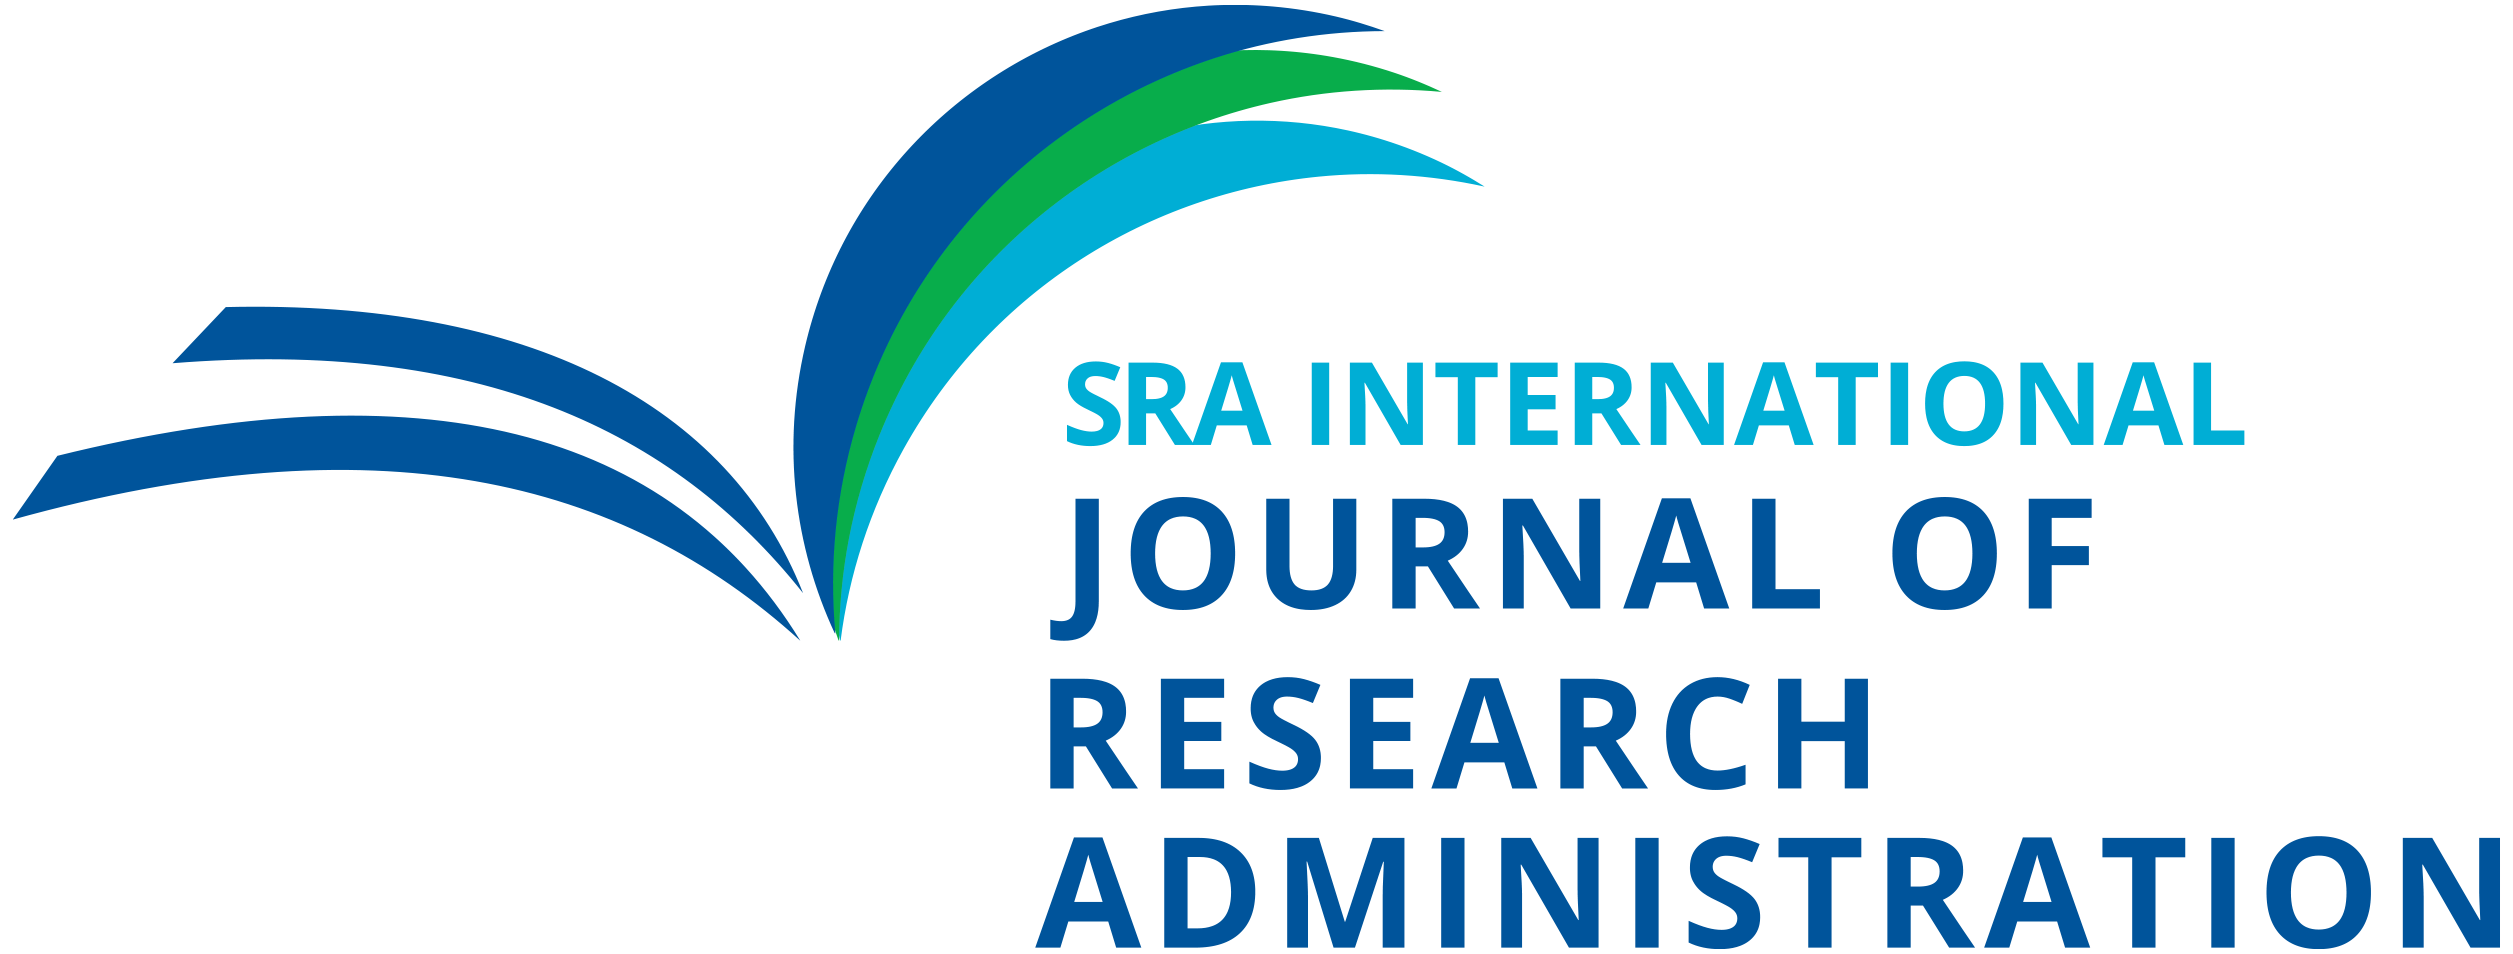 journal of research administration